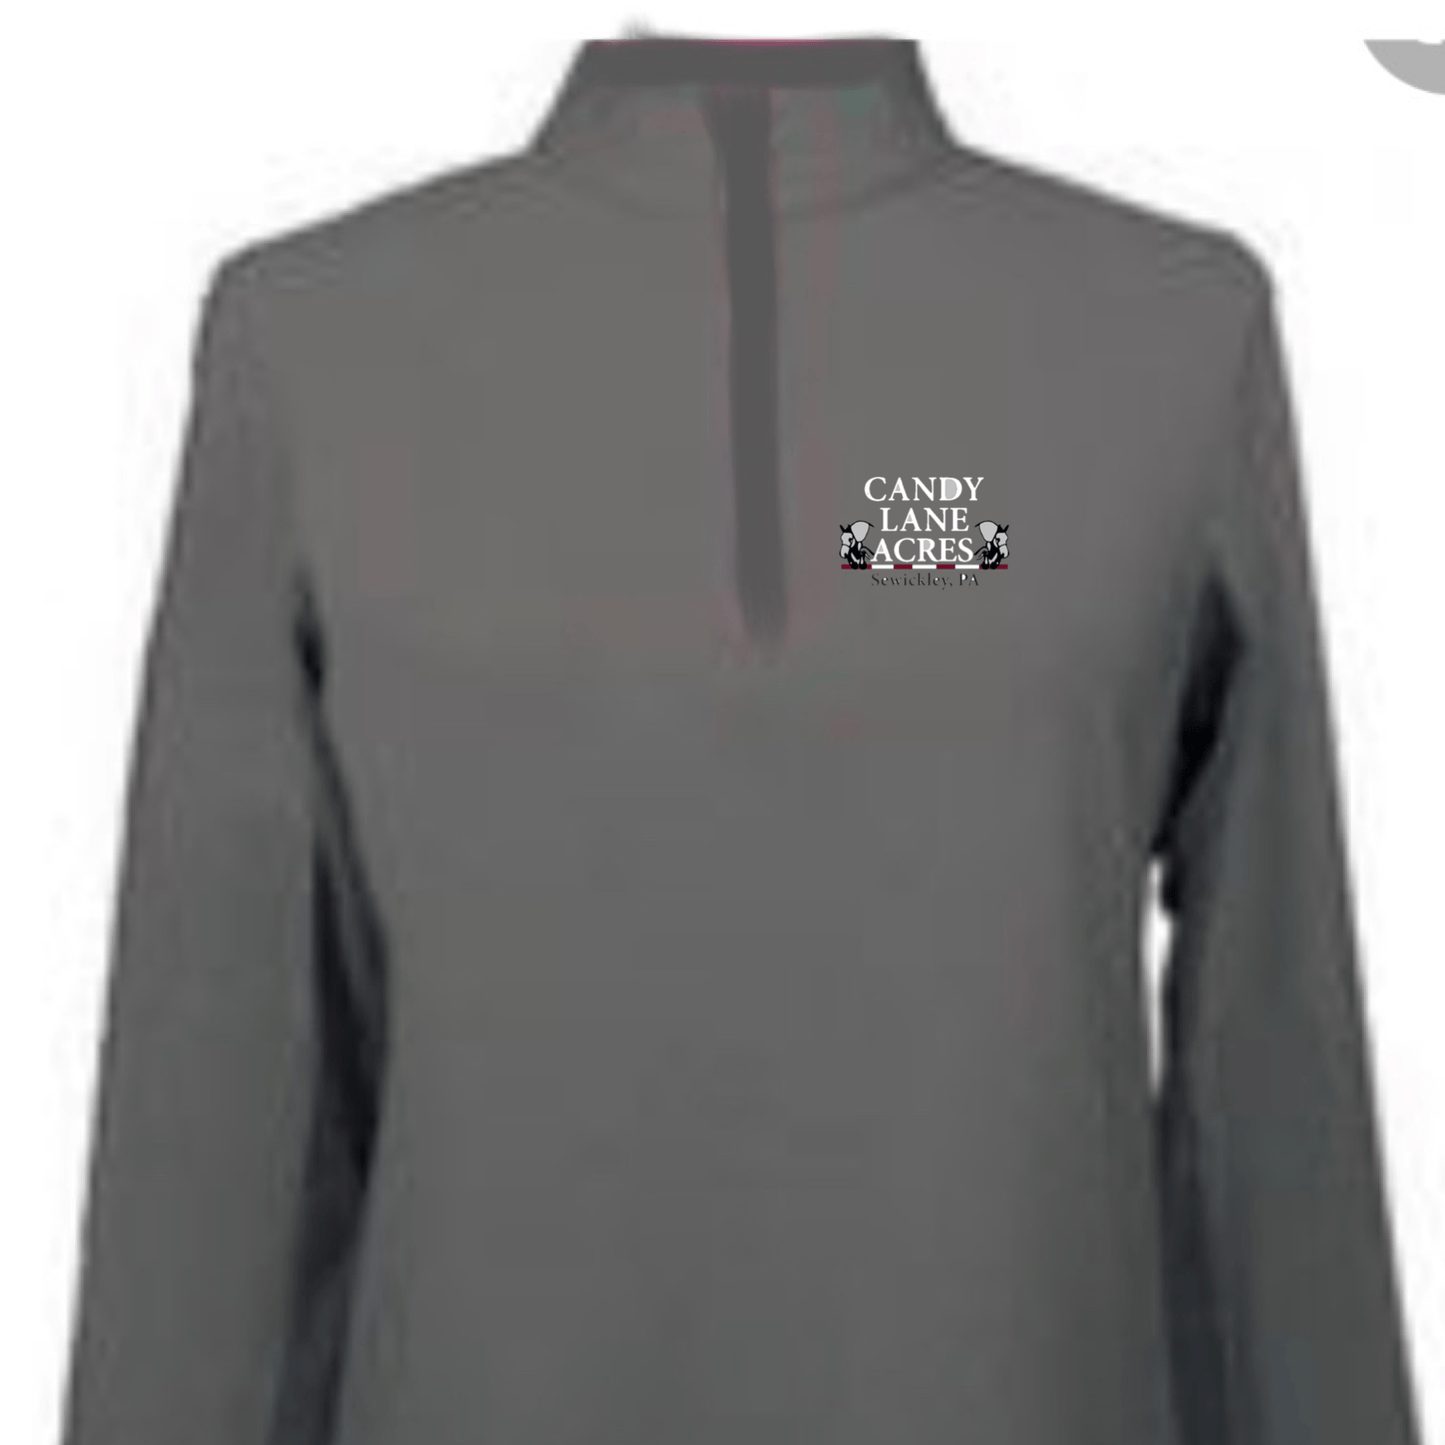 Equestrian Team Apparel custom team shirts Candy Lane Acres -EIS Long Sleeve equestrian team apparel online tack store mobile tack store custom farm apparel custom show stable clothing equestrian lifestyle horse show clothing riding clothes Wear a flattering sunshirt when you ride | made in the USA horses equestrian tack store